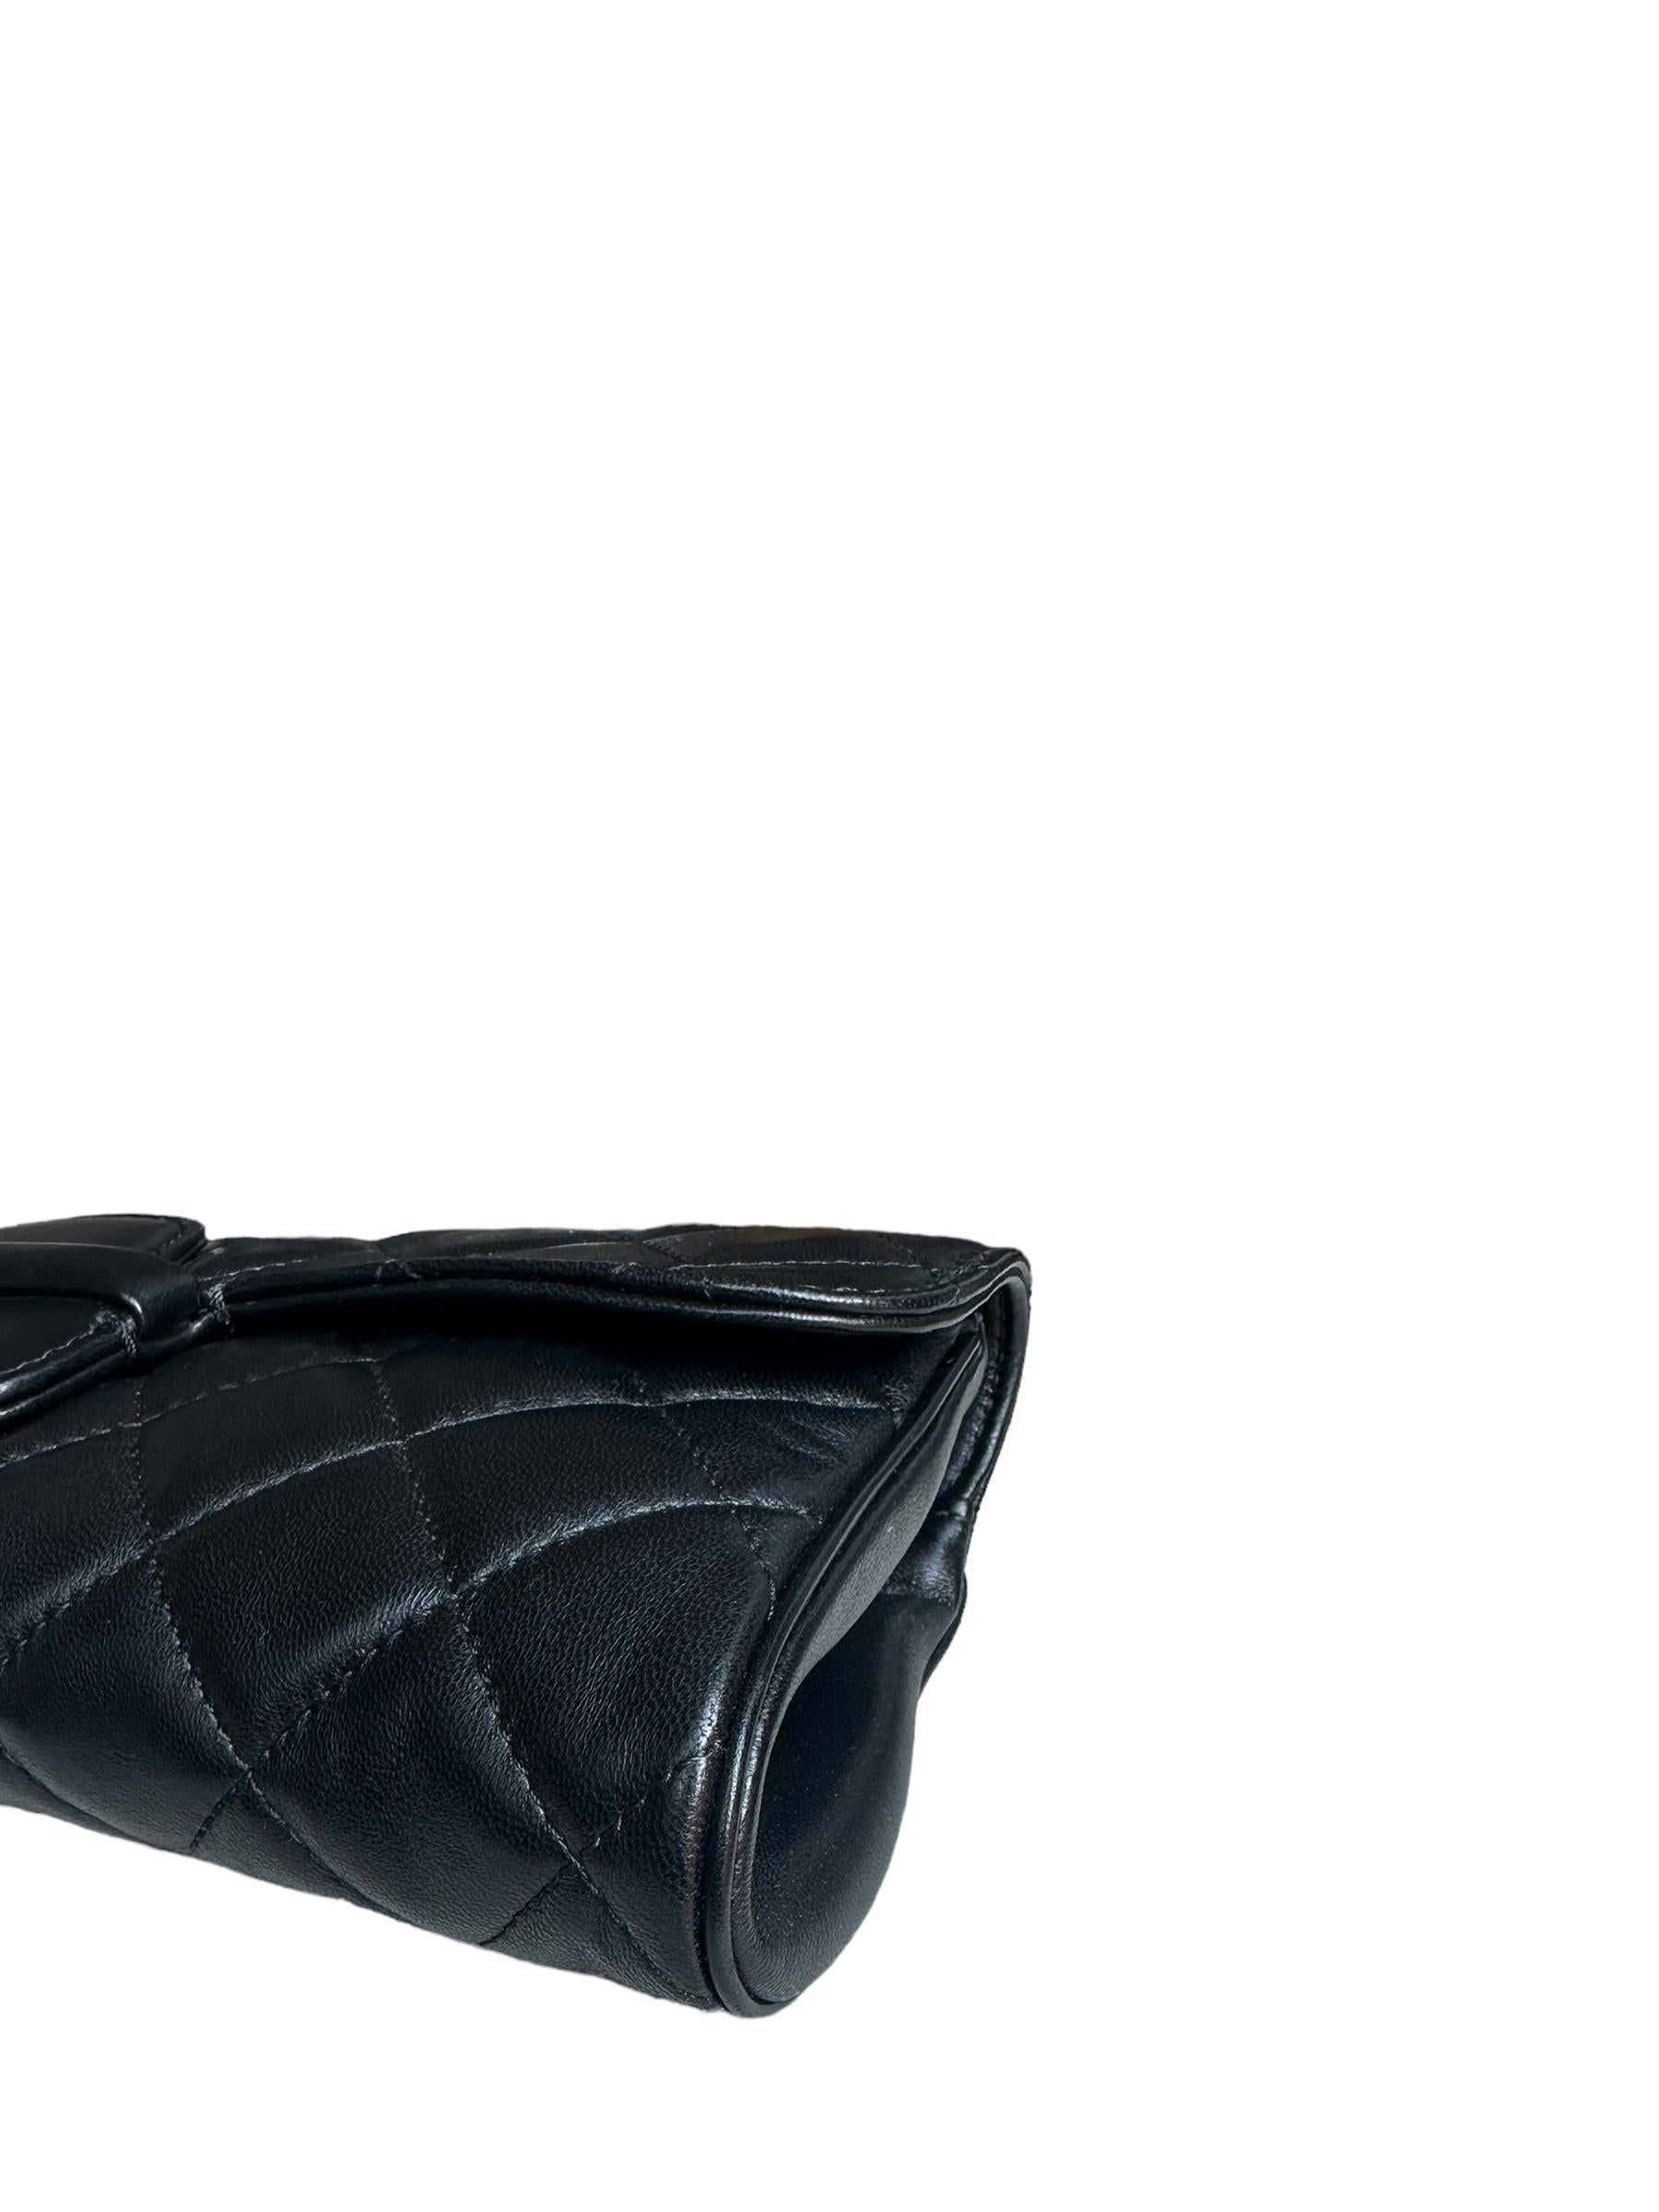 Chanel Black Lambskin Leather CC Twistlock Clutch Bag In Excellent Condition For Sale In New York, NY